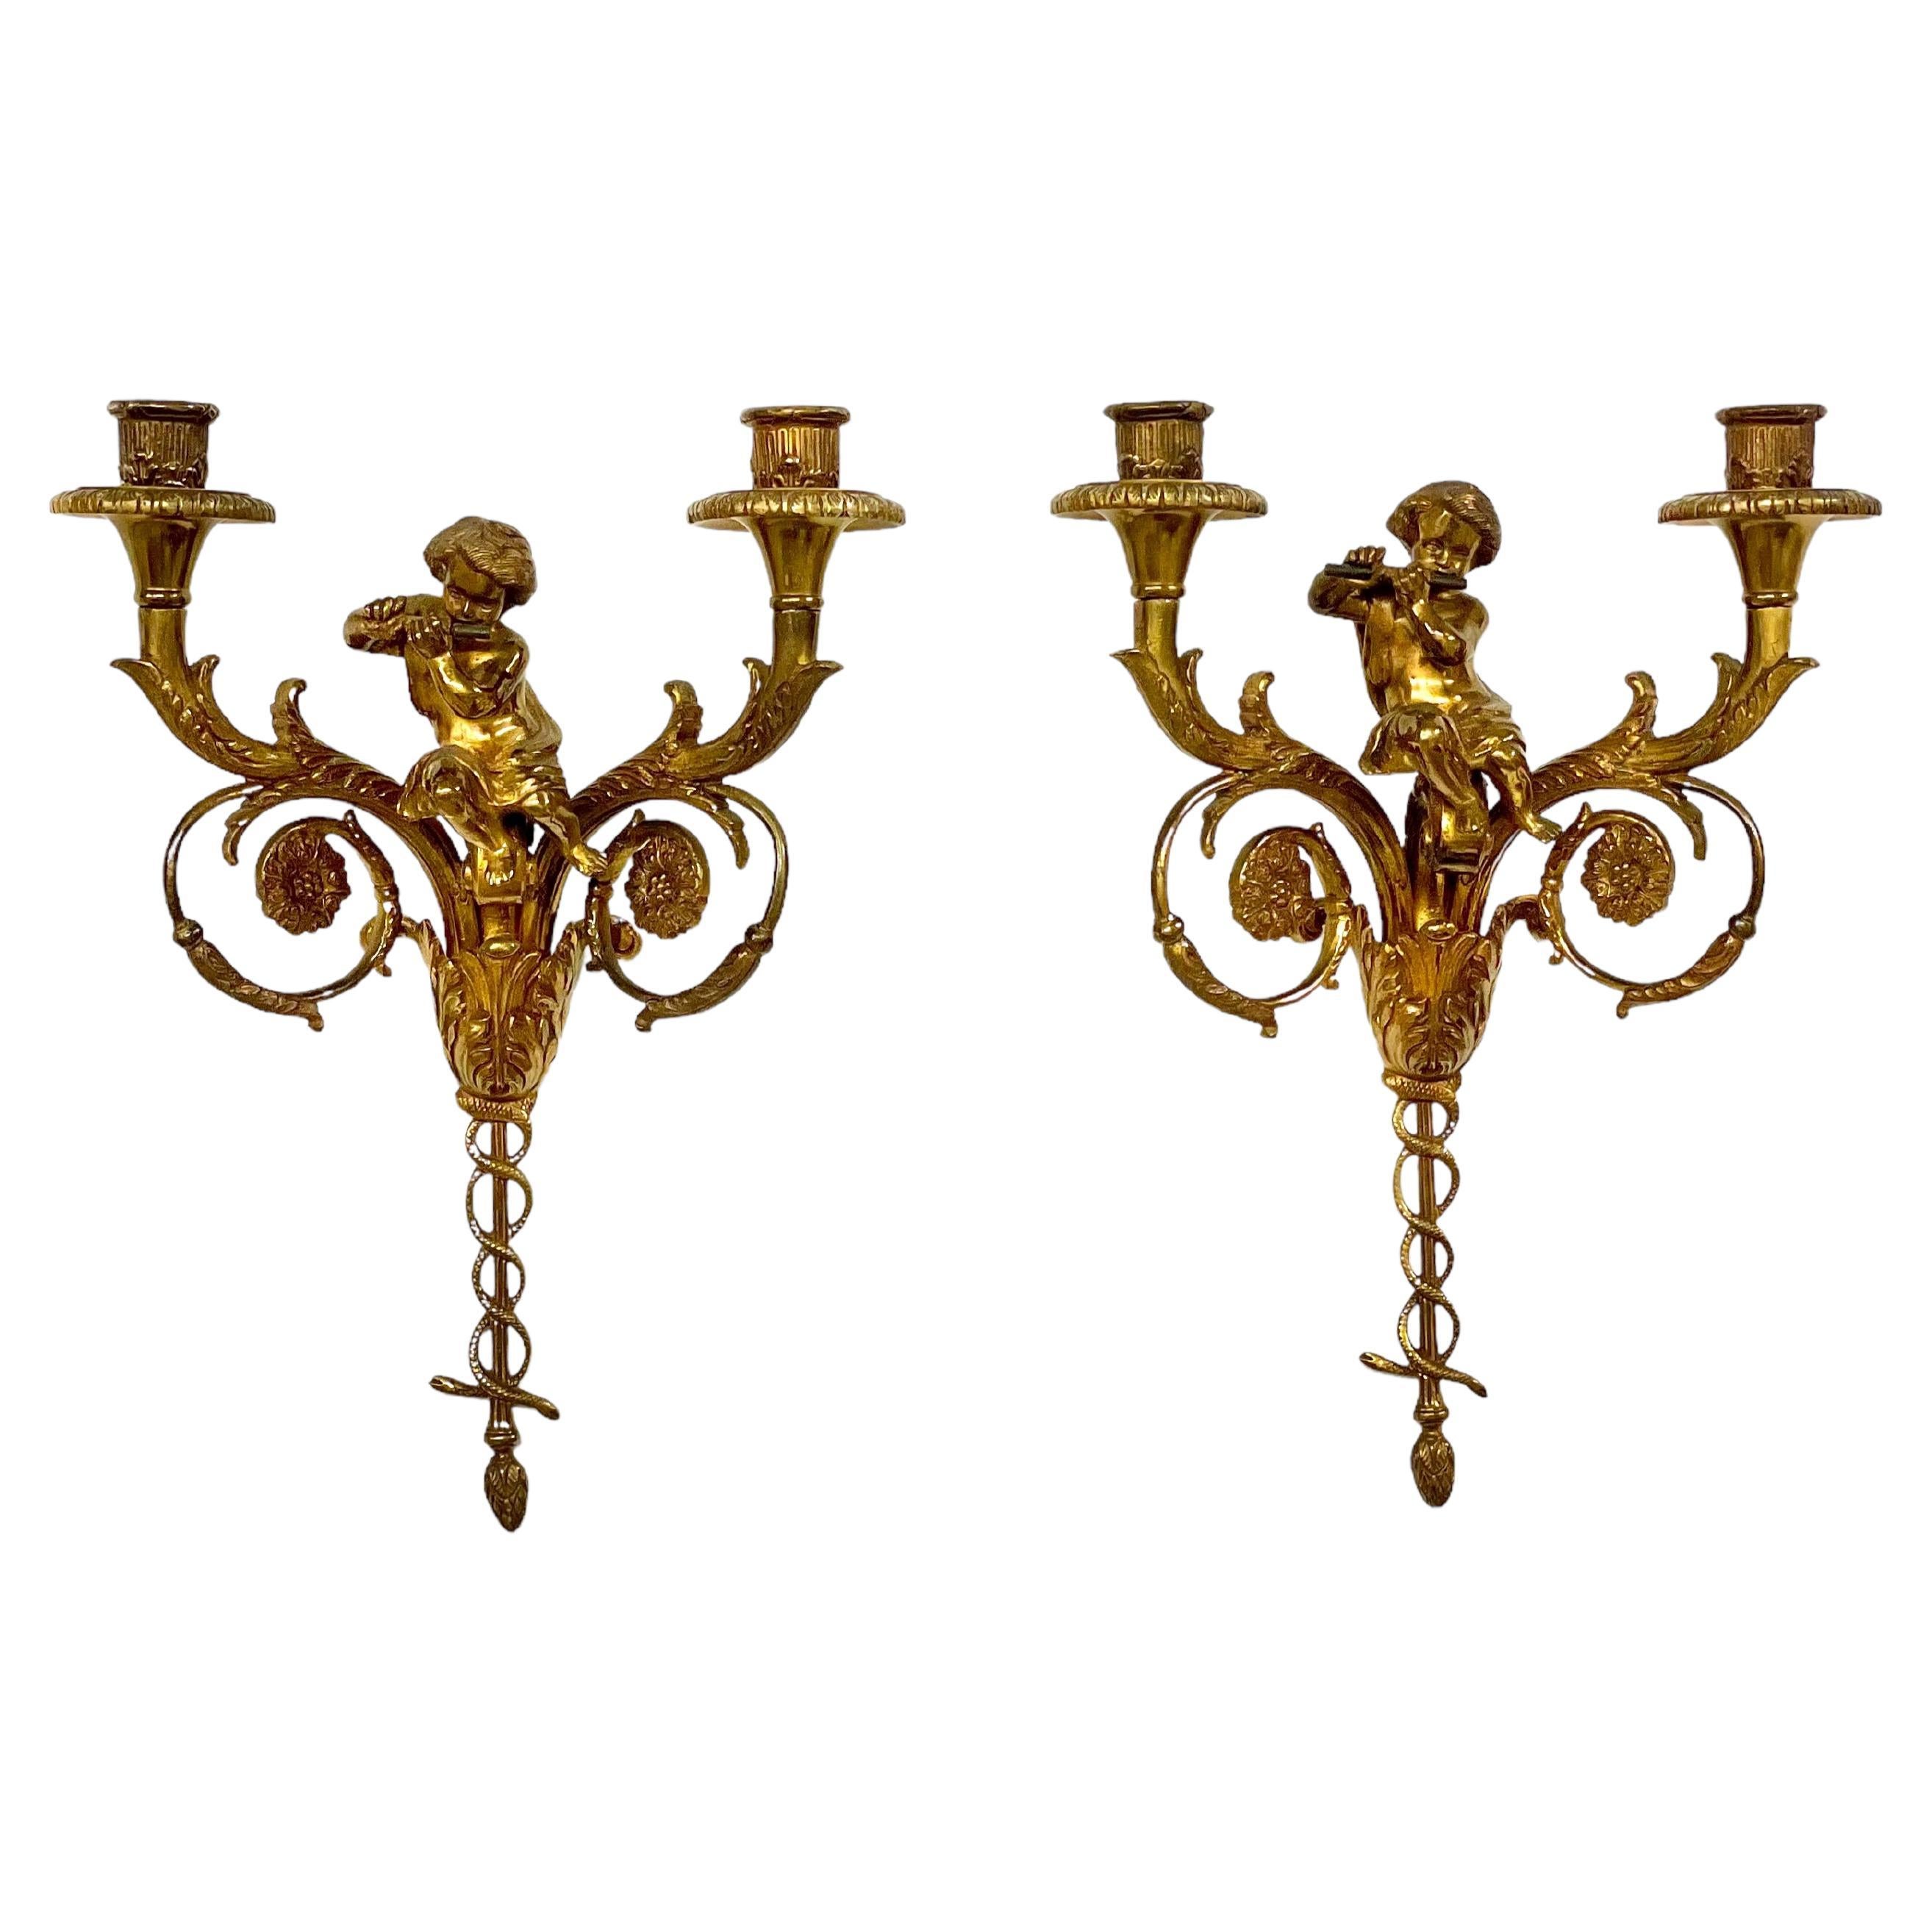 Attributed to Maison Charles Pair of Tall Gilt Bronze Wall Sconces 